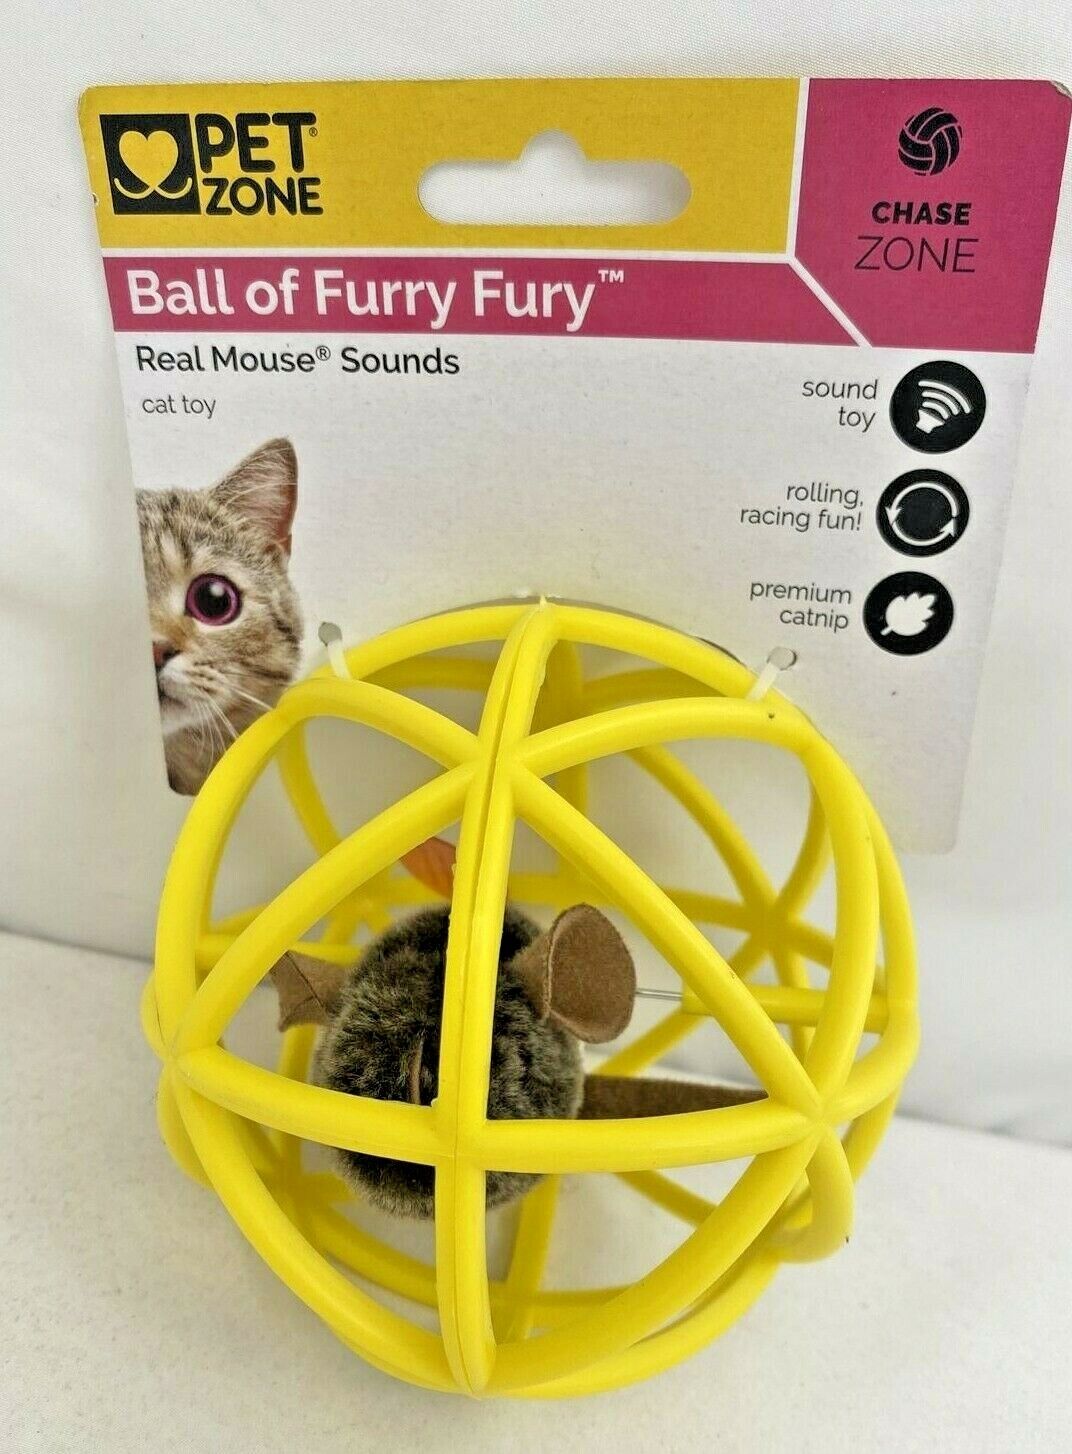 Pet Milwaukee Mall Zone security Ball of Furry Fury-Real Catnip Toy Mouse Sounds Cat